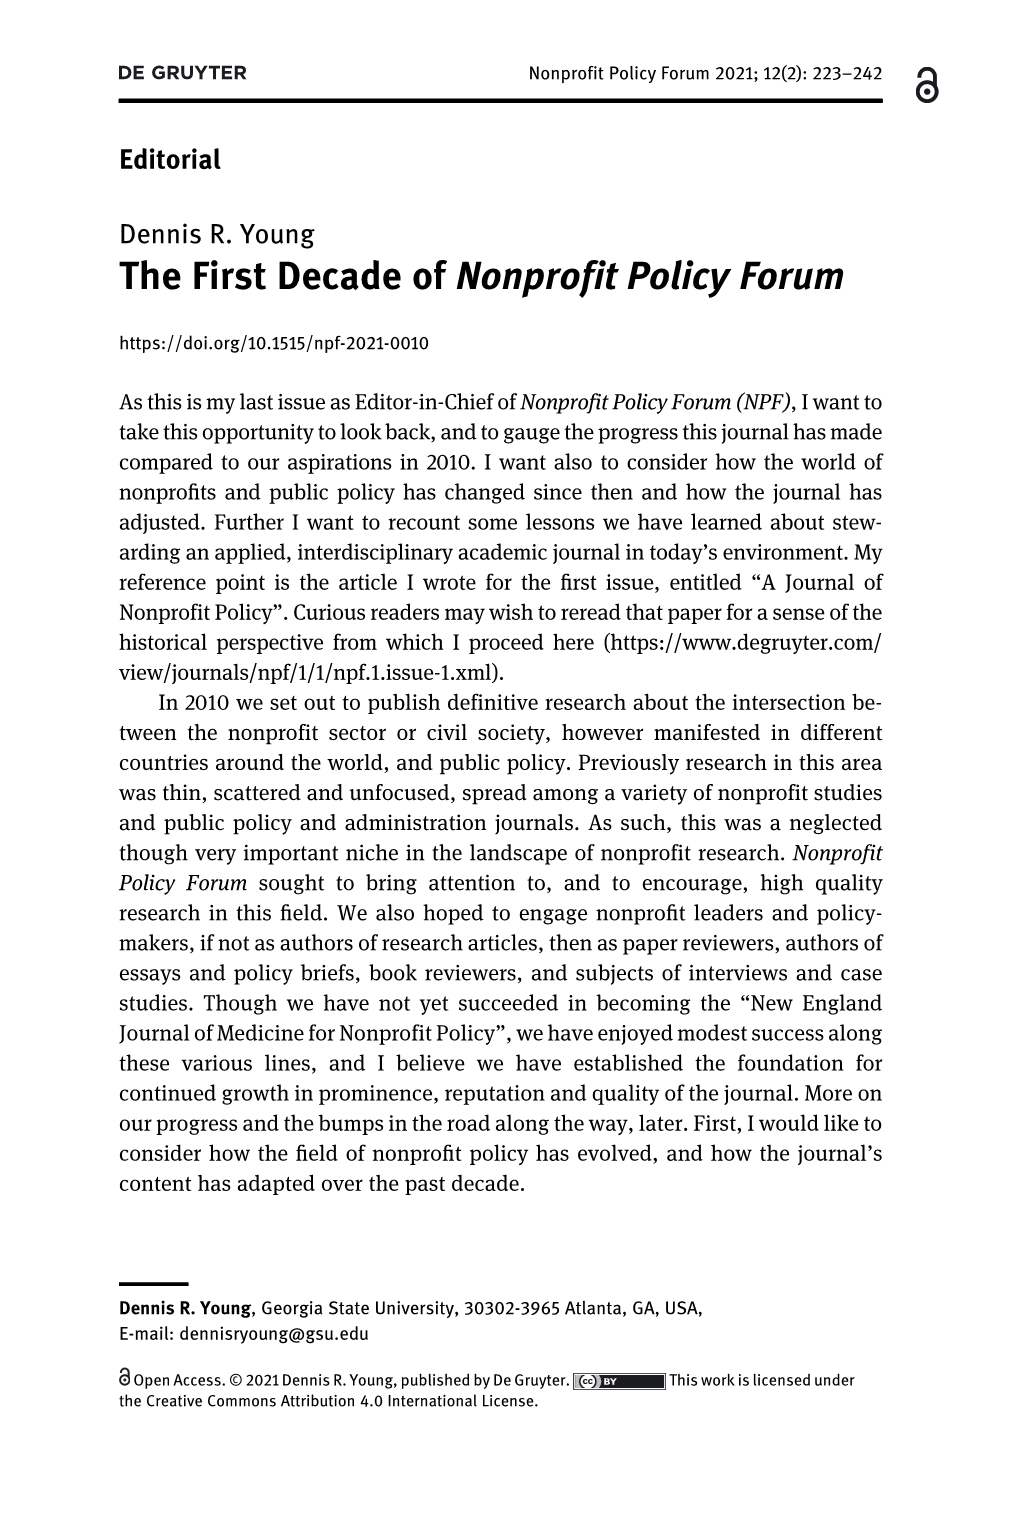 The First Decade of Nonprofit Policy Forum